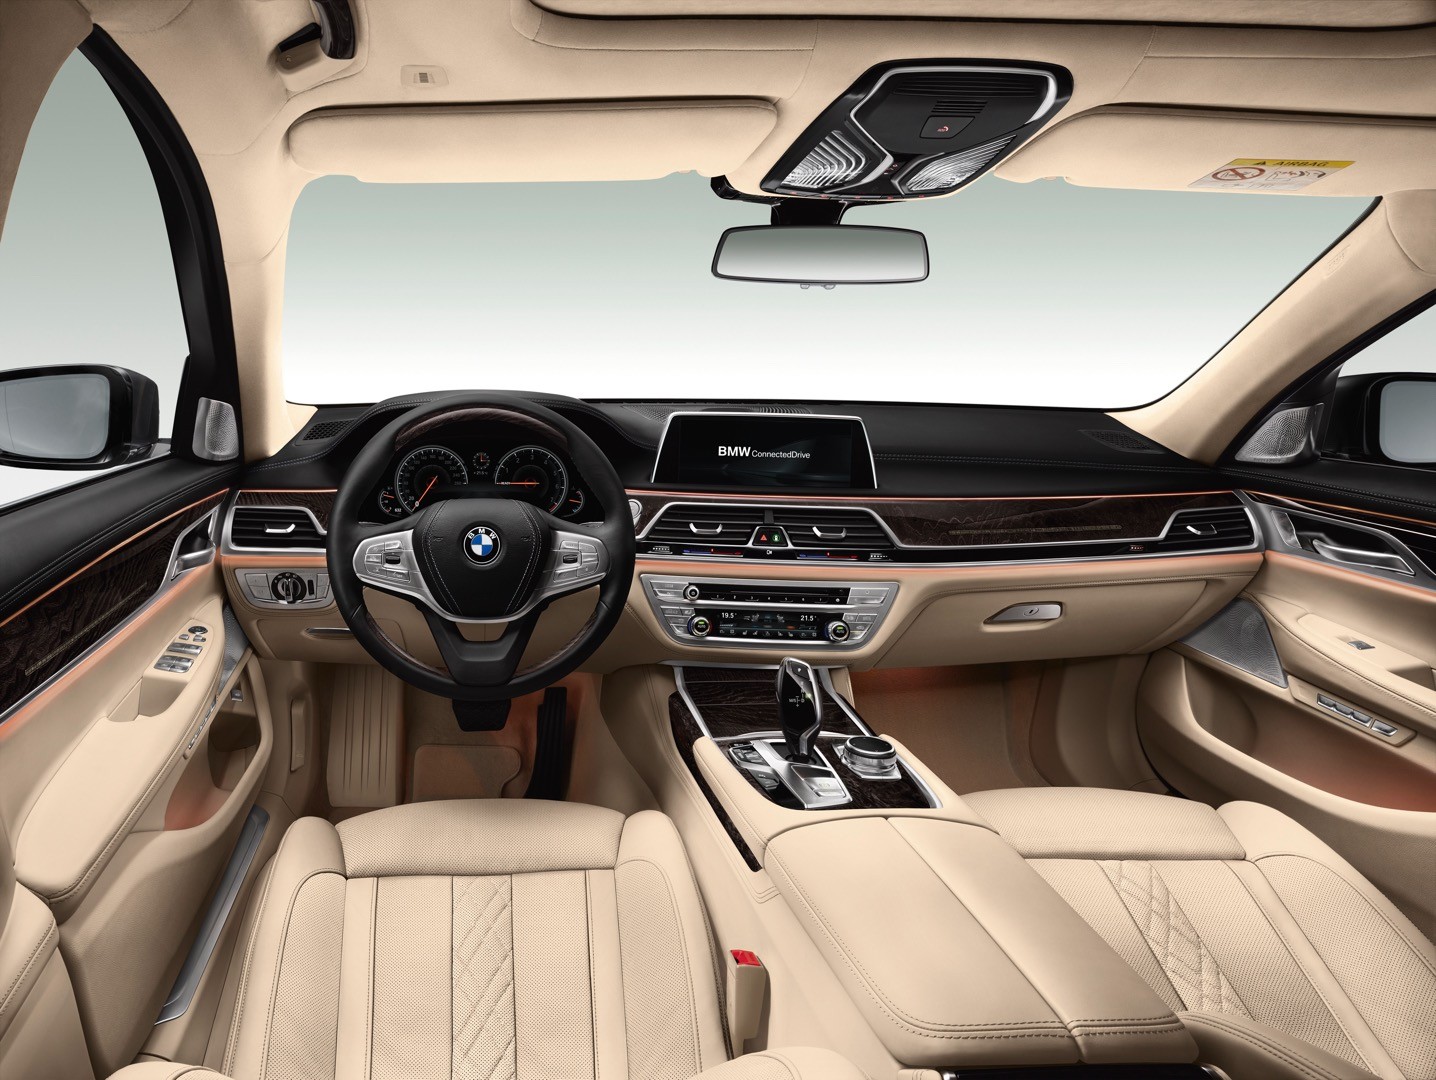 2016-bmw-7-series-finally-officially-unveiled-the-good-stuffs-inside-photo-gallery_115